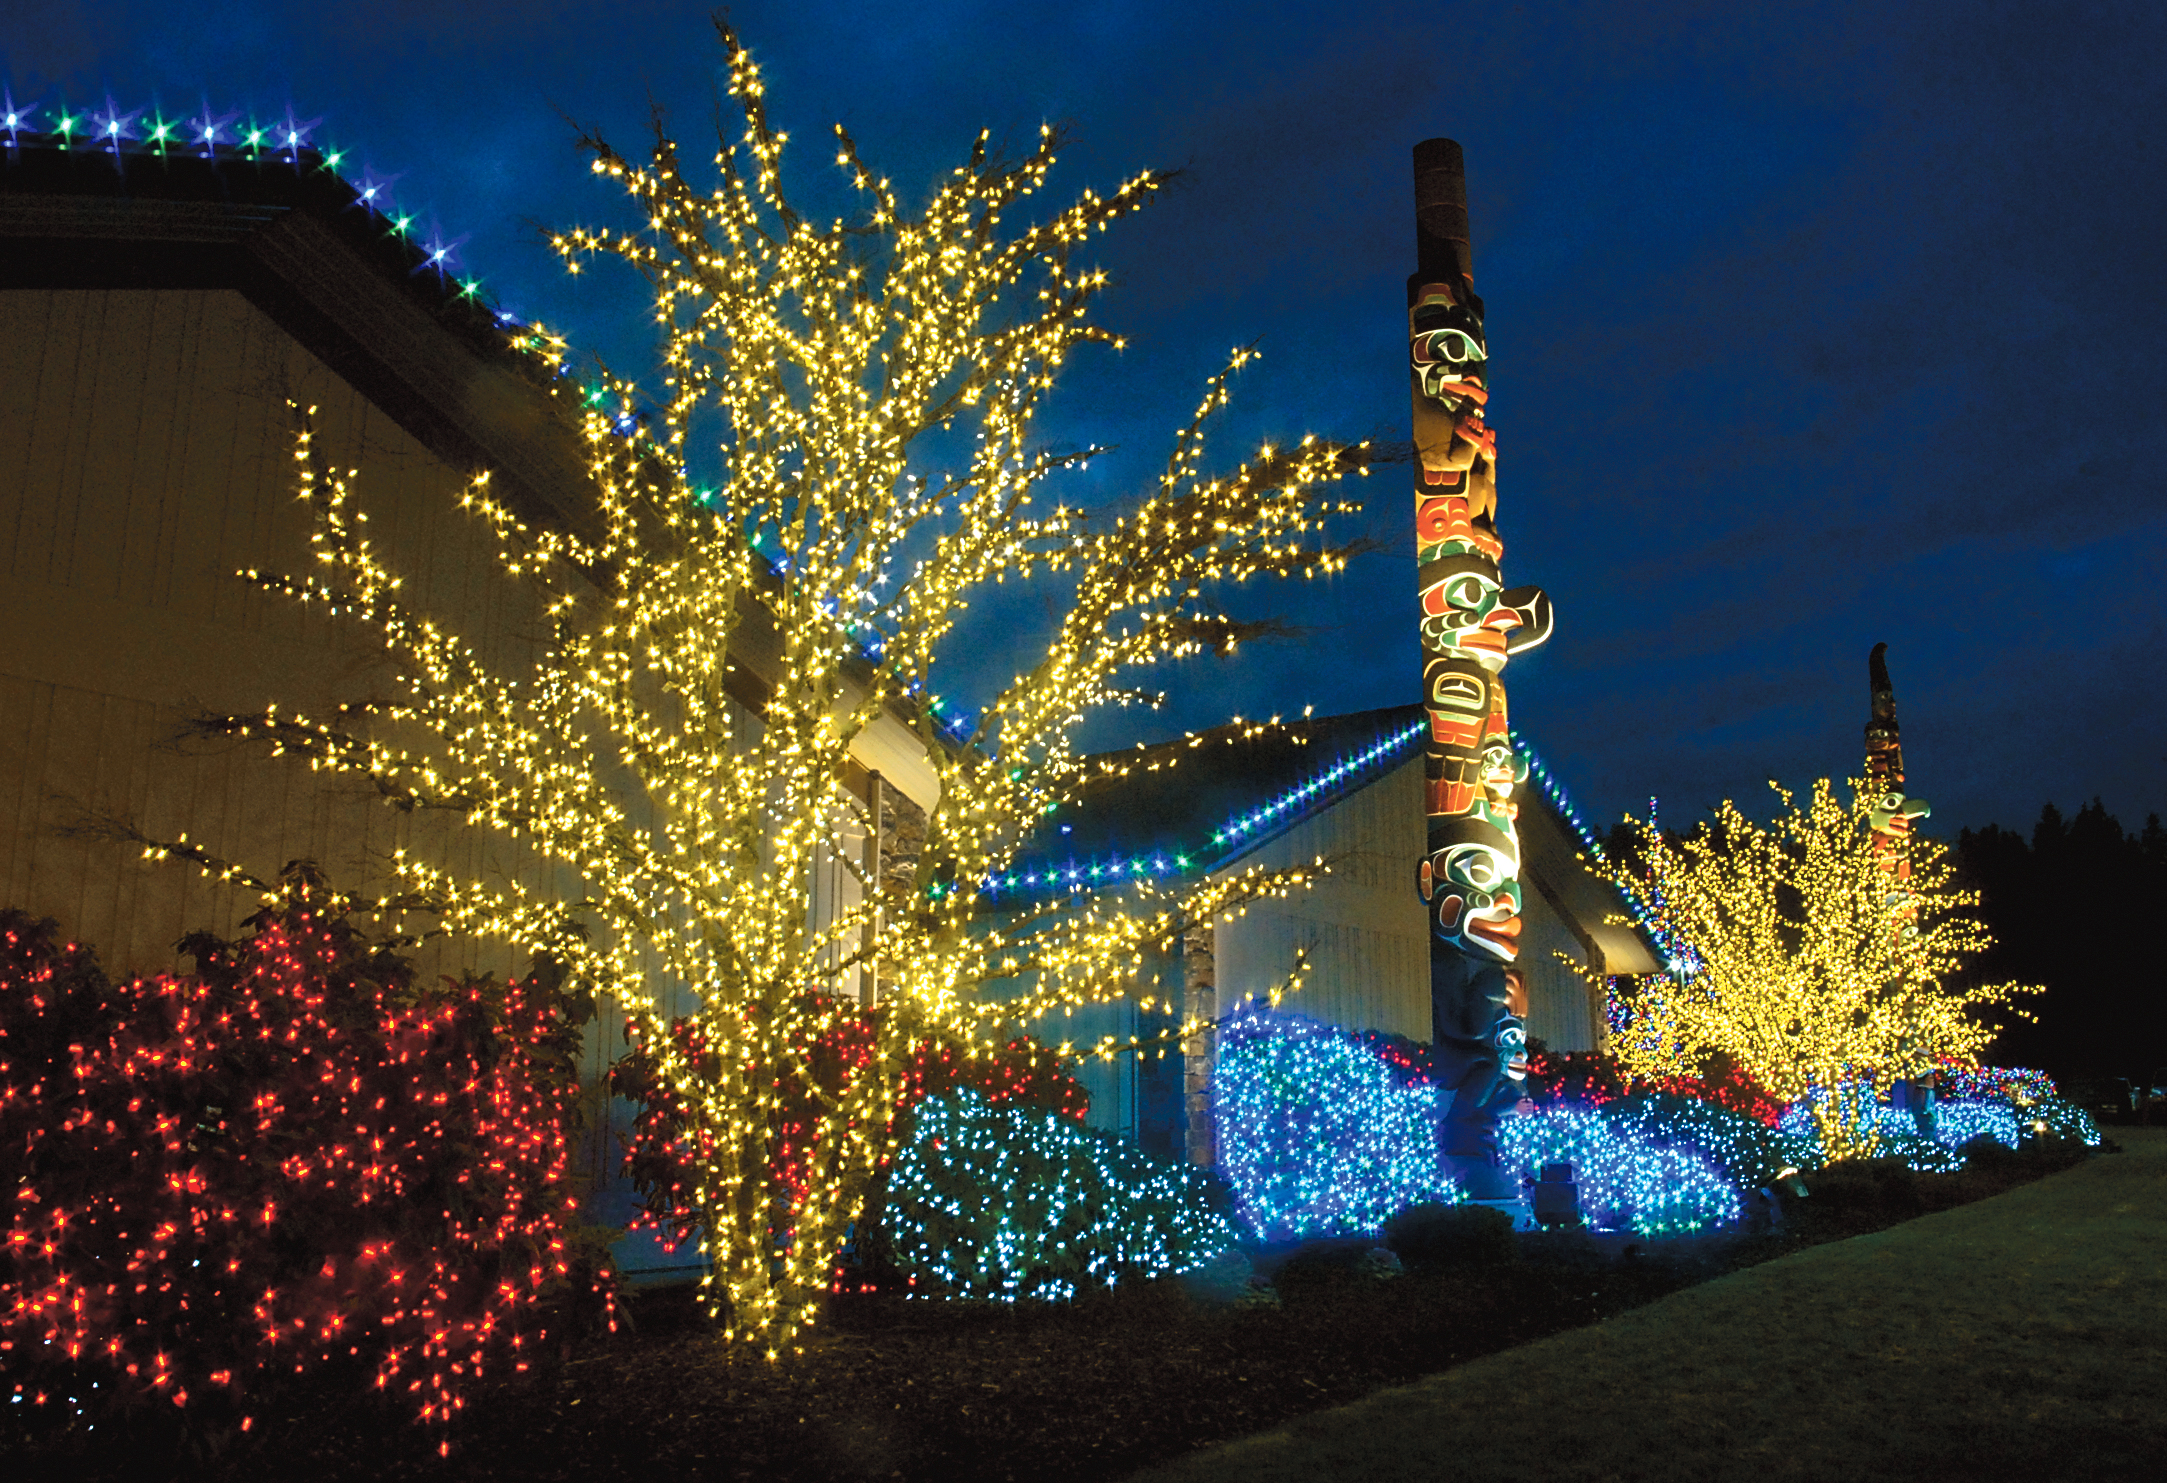 Biggest and brightest Where to see the best holiday lights on the